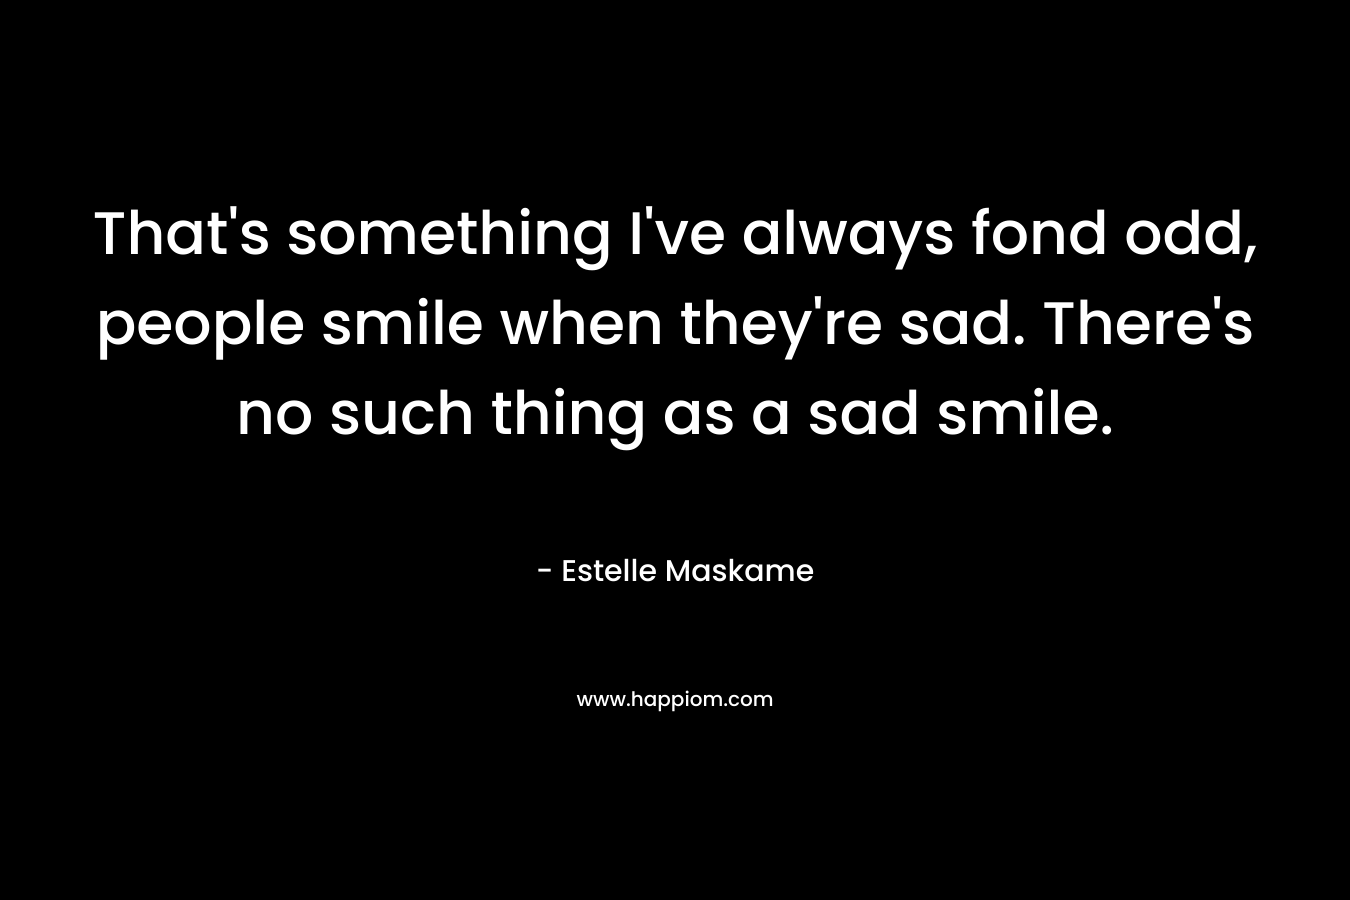 That's something I've always fond odd, people smile when they're sad. There's no such thing as a sad smile.